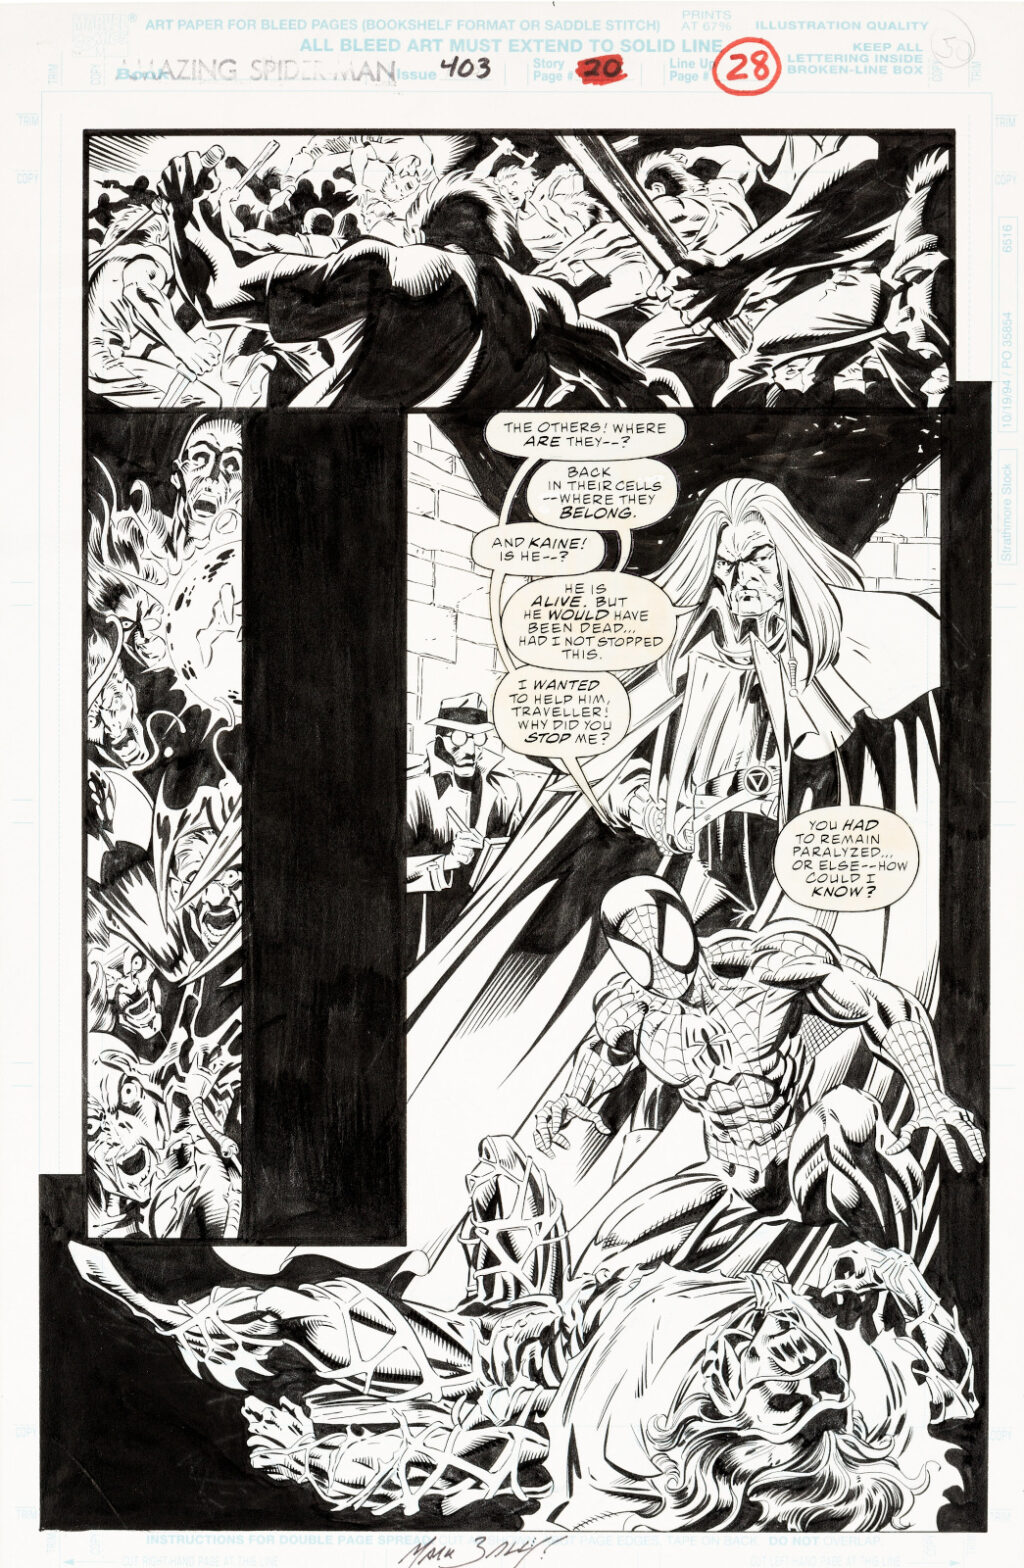 Amazing Spider Man issue 403 page 28 by Mark Bagley and Larry Mahlstedt